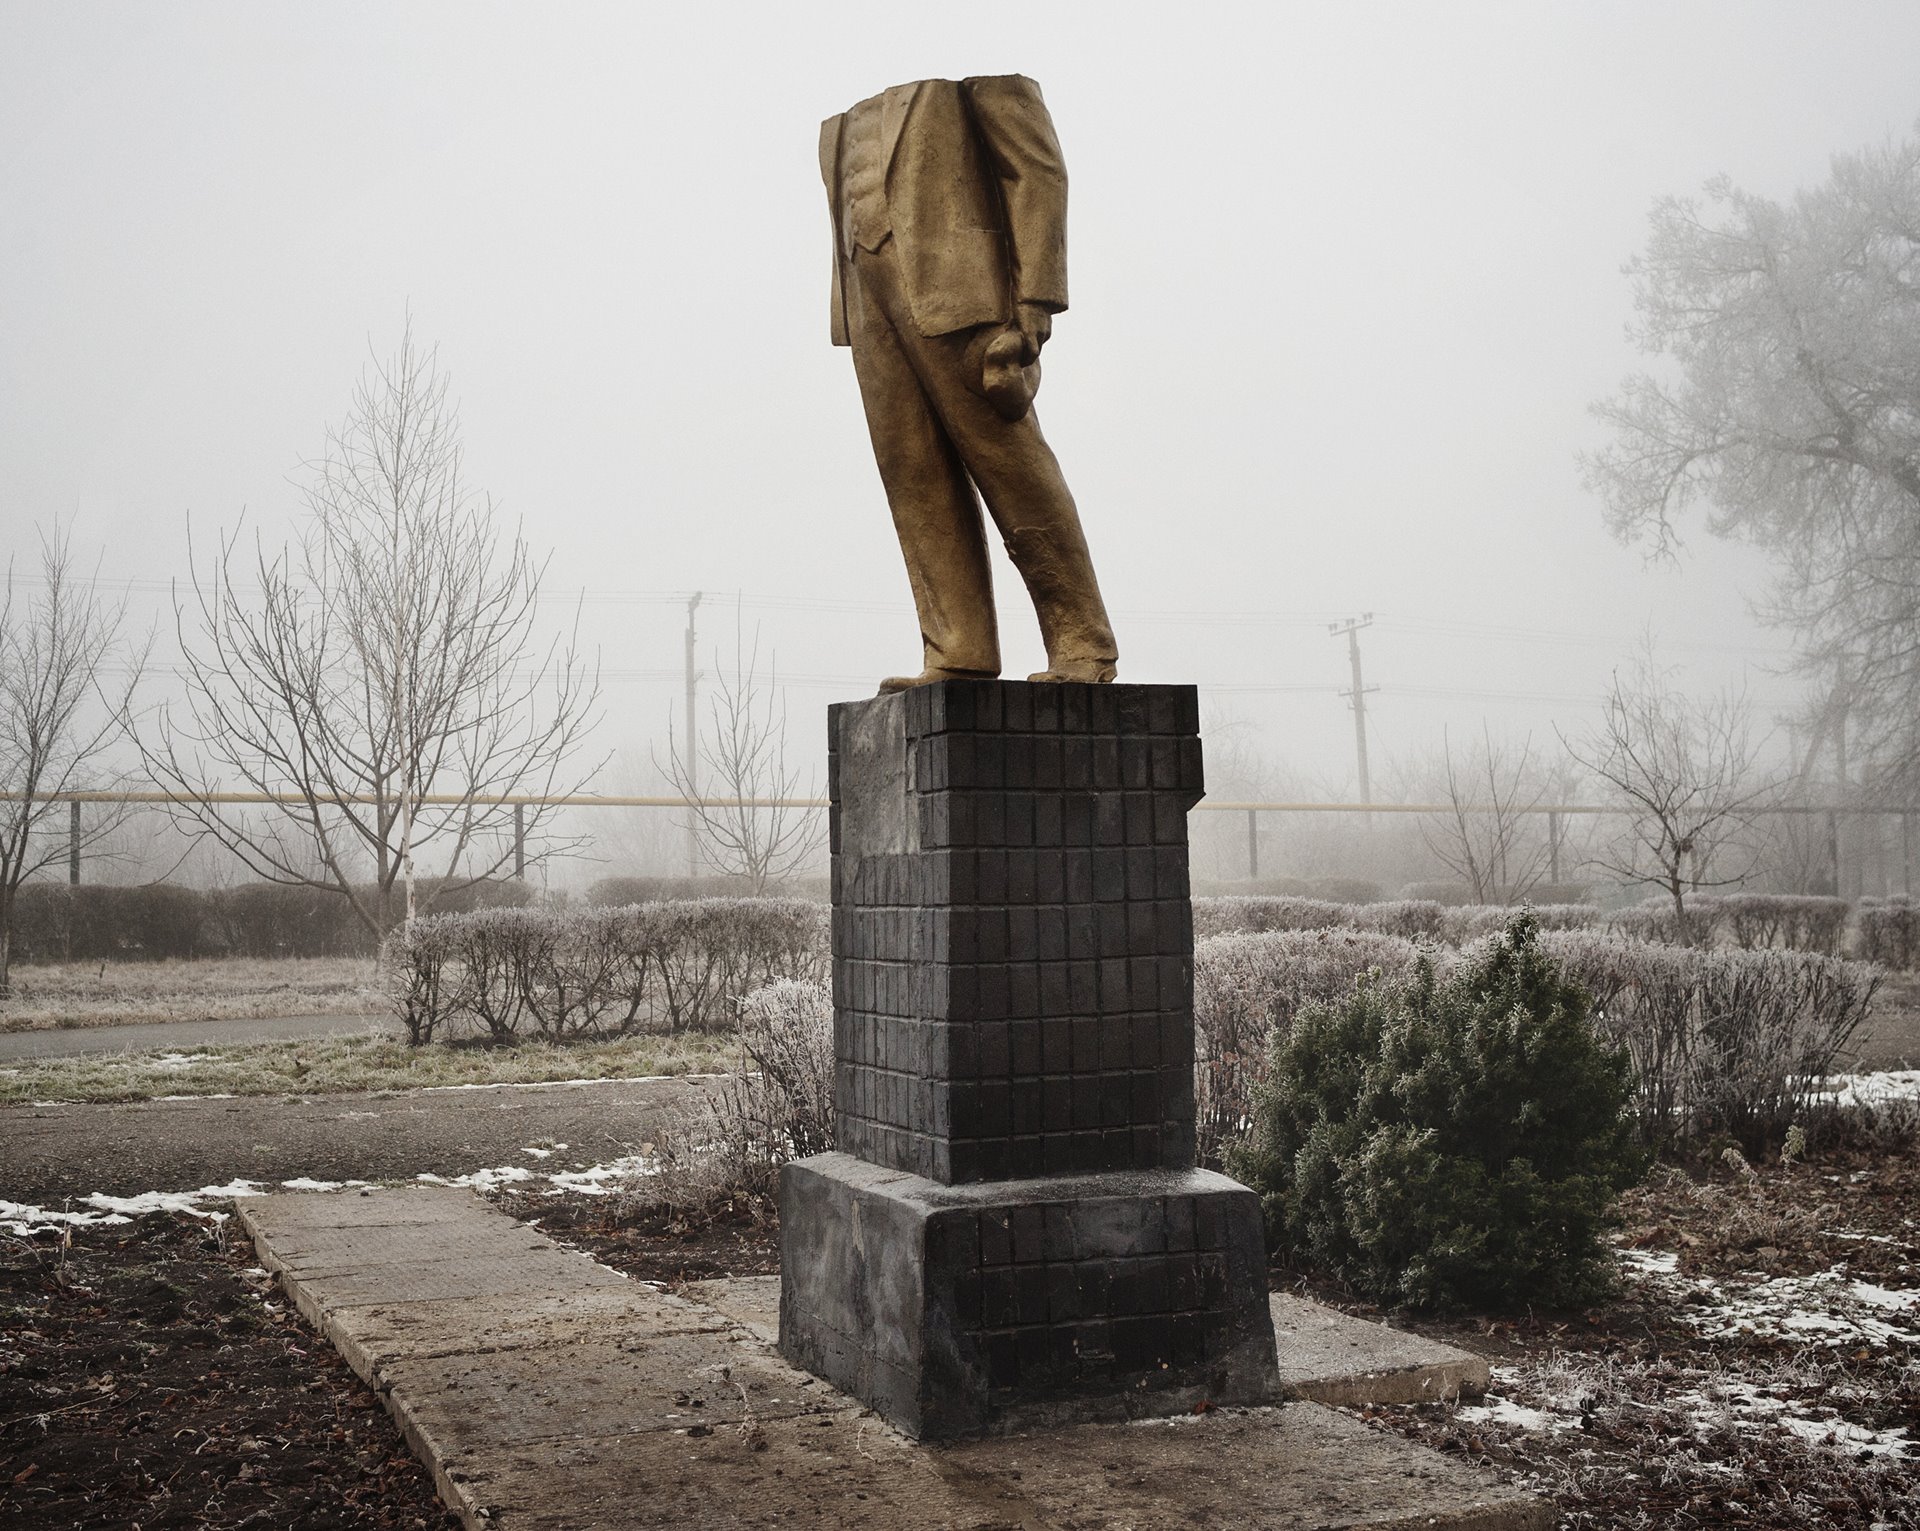 A decapitated statue of Lenin stands in Cheminots Park, Kotovsk, Ukraine, on 19 December 2013. The statue was destroyed by ultra-nationalists on the night of 8&ndash;9 December.